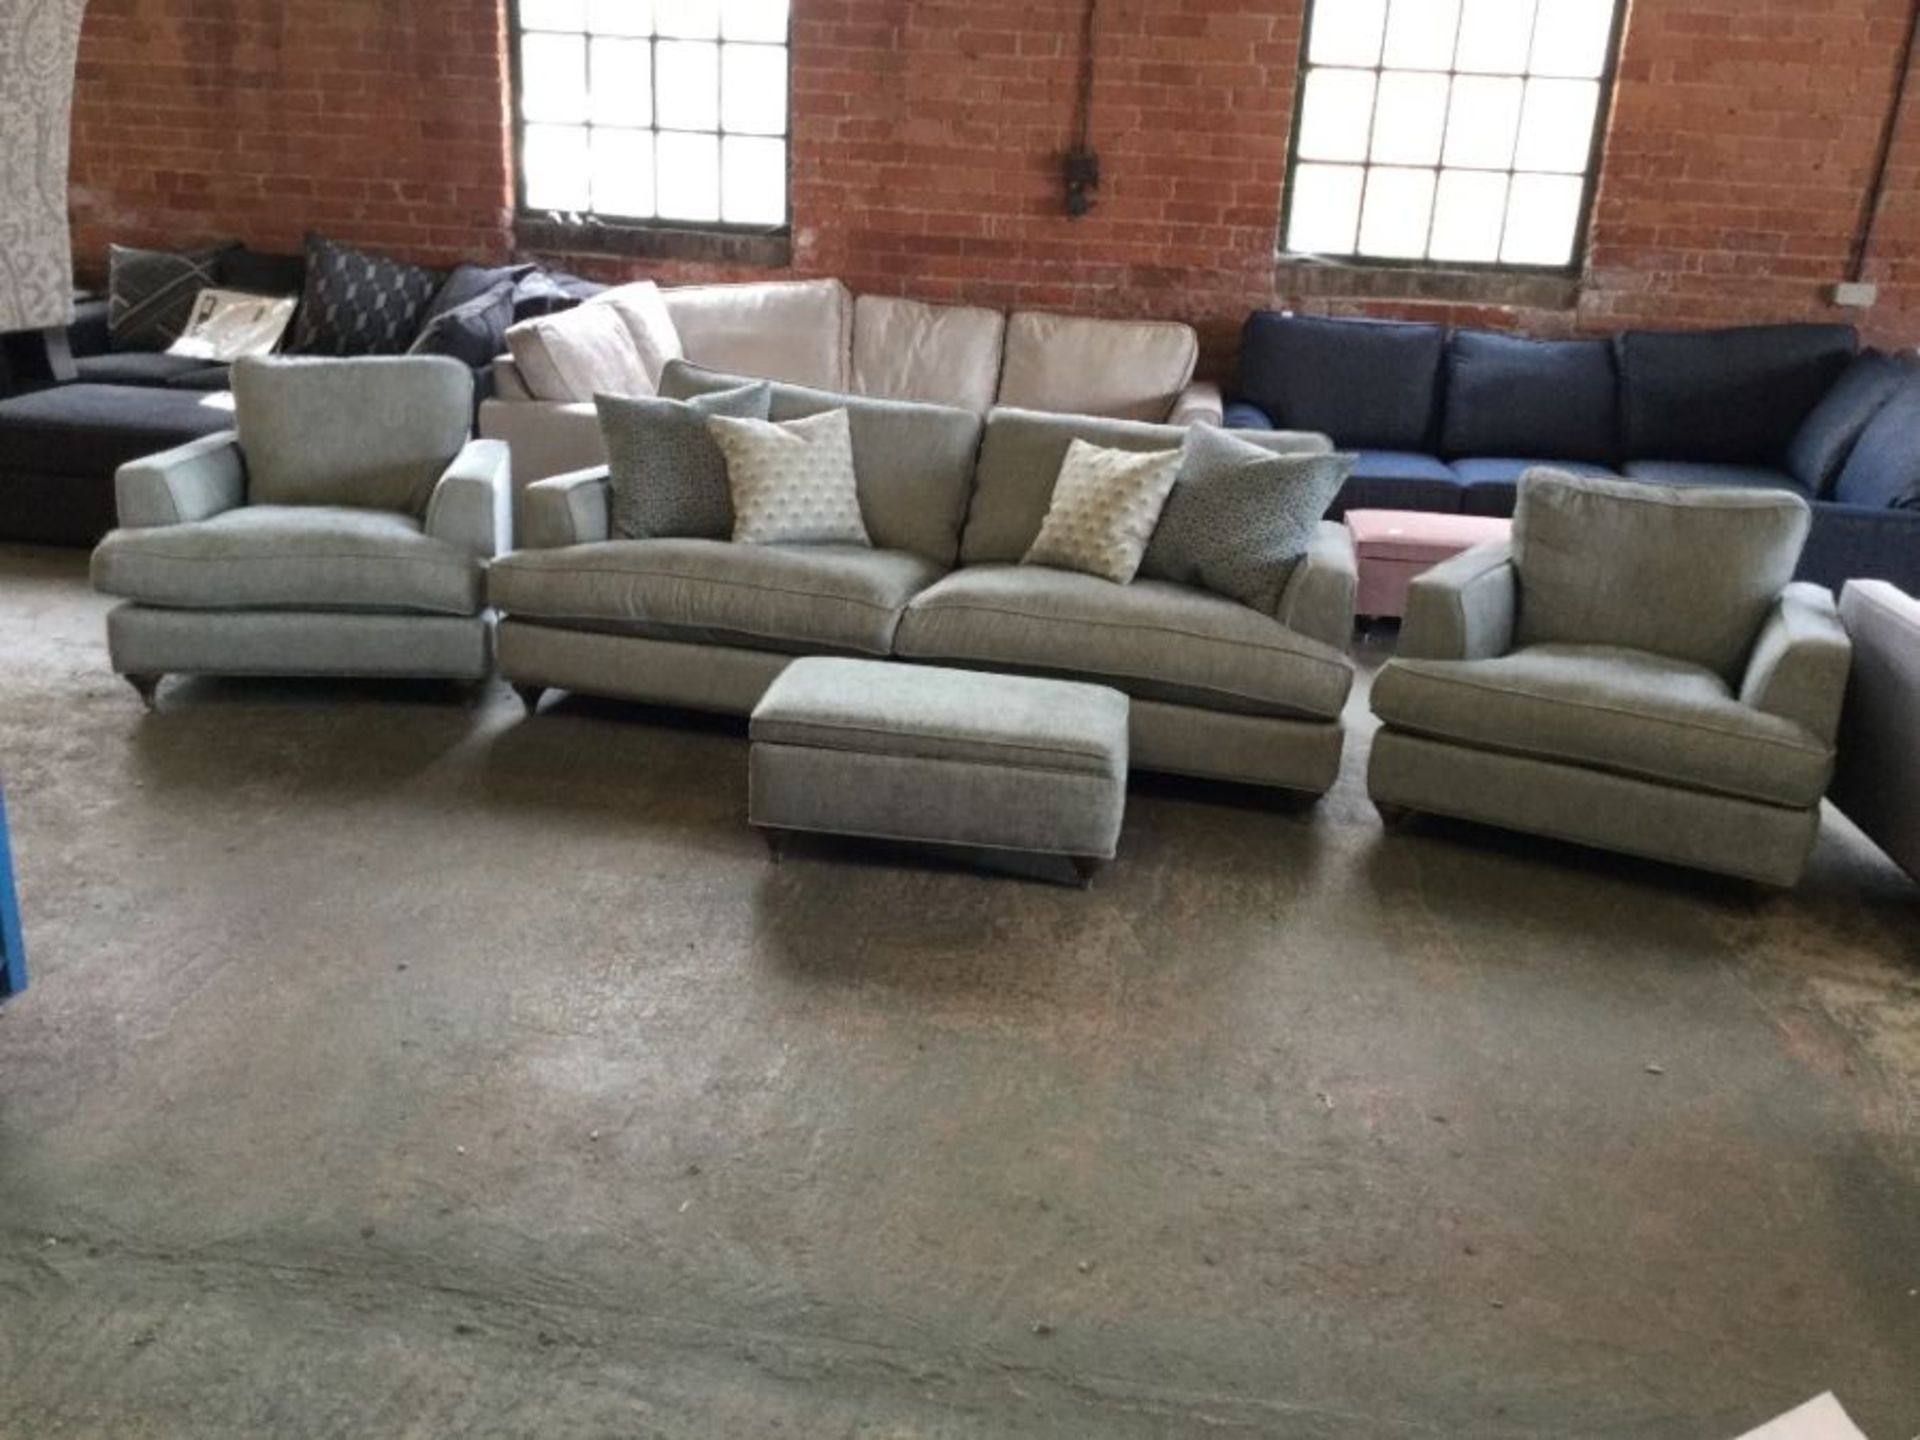 DUCK EGG BLUE 3 SEATER SOFA 2X CHAIRS AND FOOTSTOO